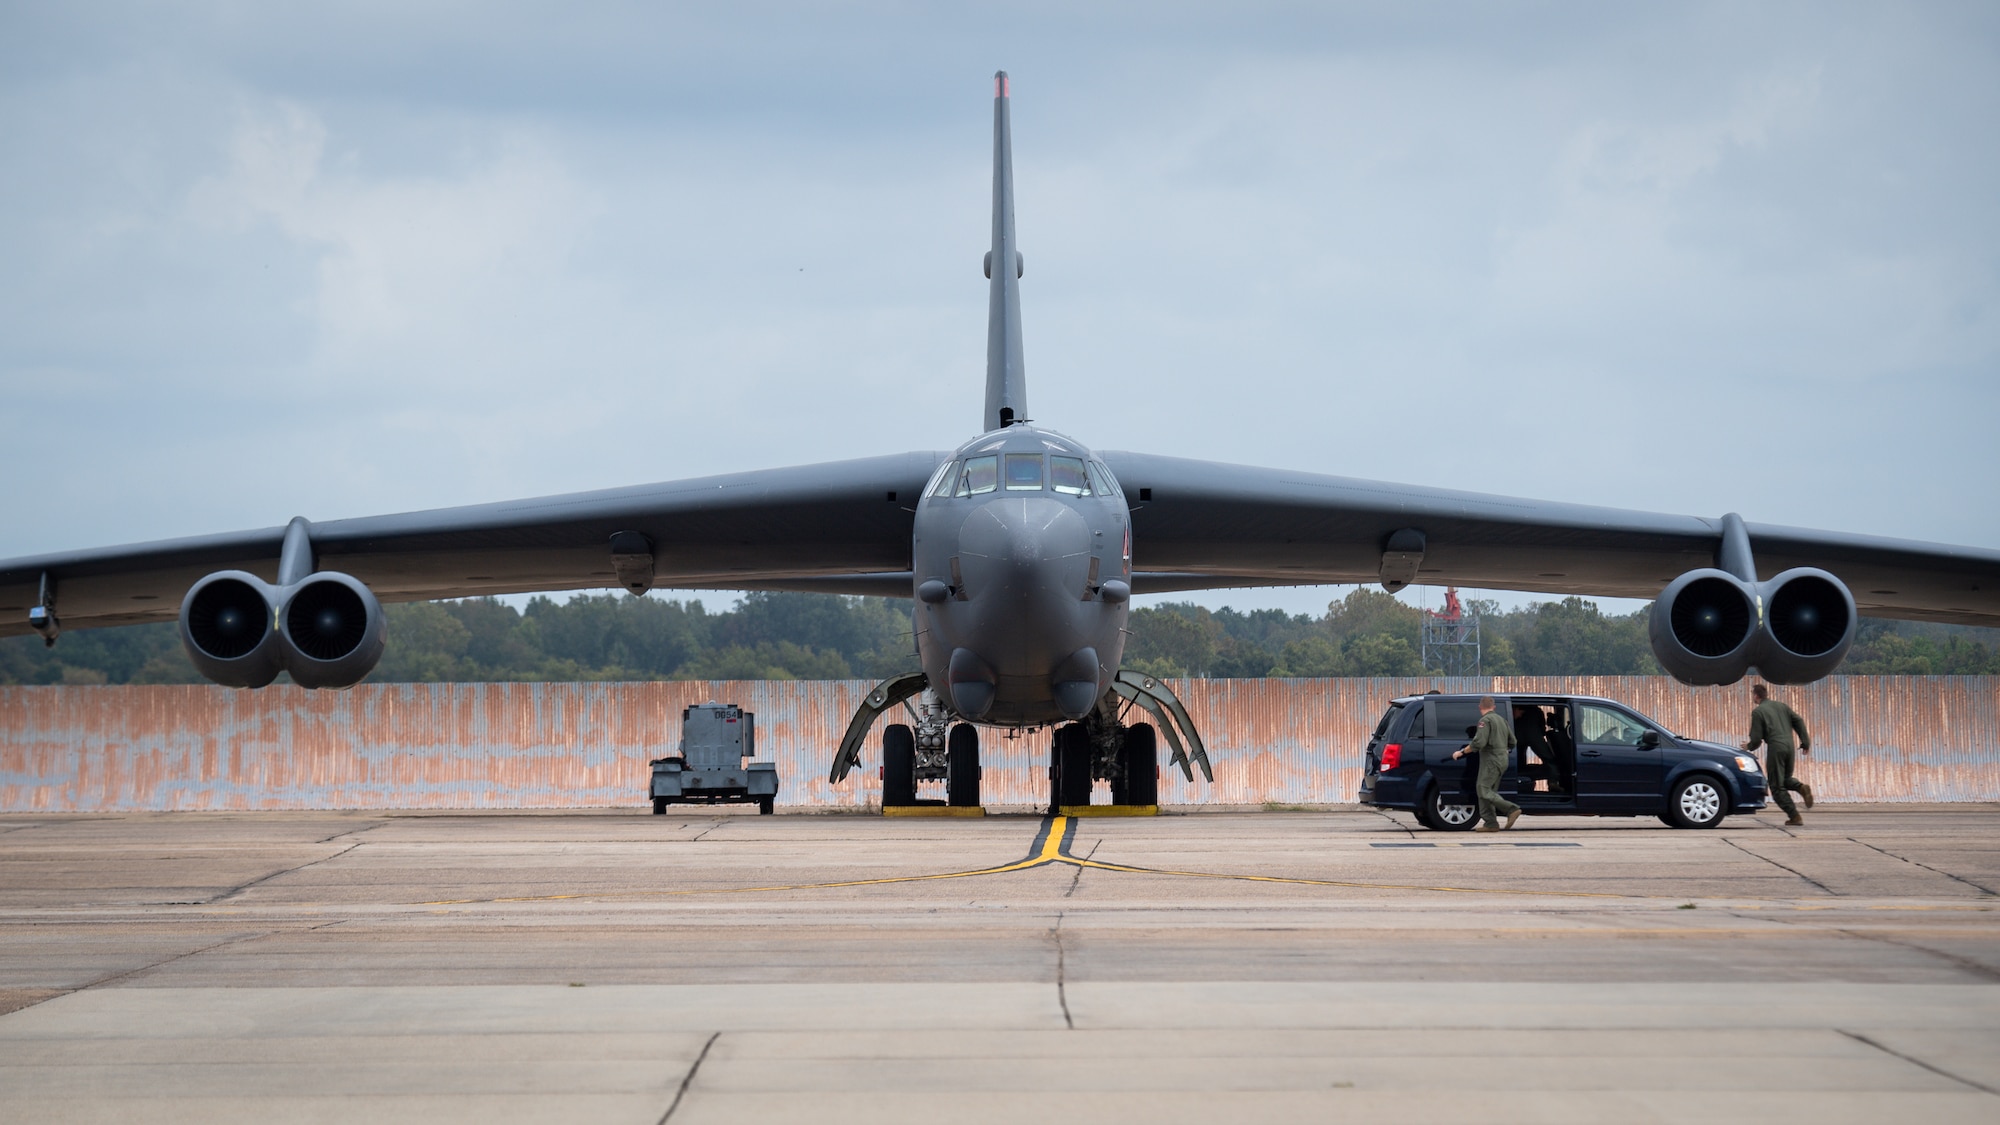 A 2nd Bomb Wing aircrew runs to a B-52H Stratofortress before take off during Global Thunder 21 at Barksdale Air Force Base, La., Oct. 23, 2020. Testing our readiness to confront uncertainty ensures we maintain a safe, secure, effective and ready strategic deterrent force. (U.S. Air Force photo by Senior Airman Lillian Miller)